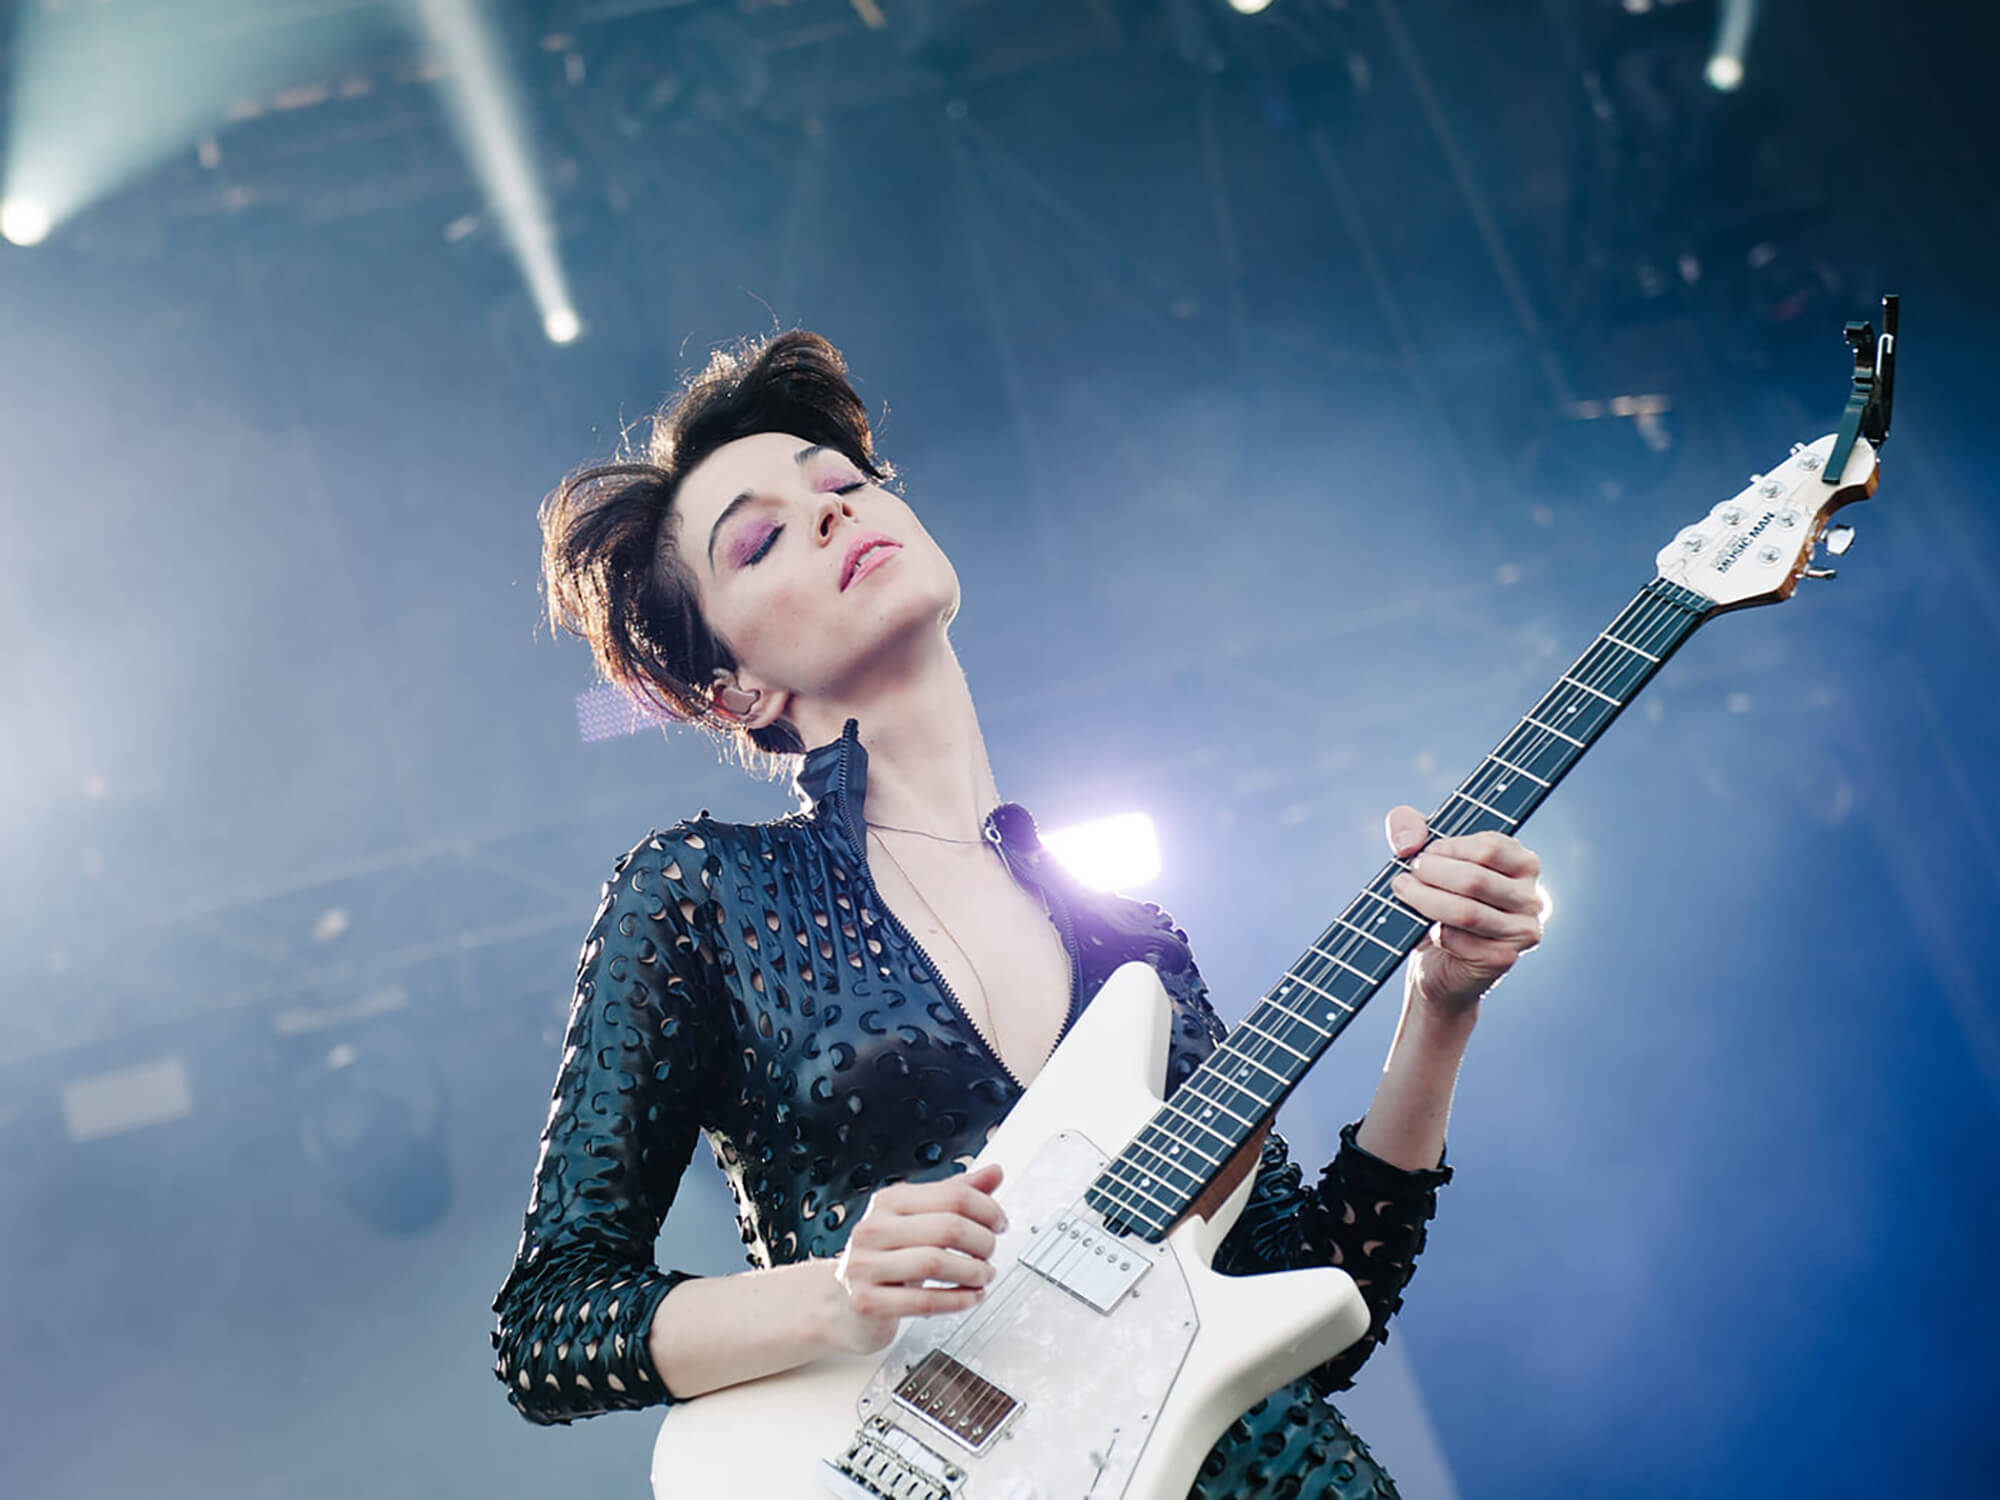 St. Vincent performing at the Osheaga Music and Arts Festival in 2015, photo by Emma McIntyre/Getty Images